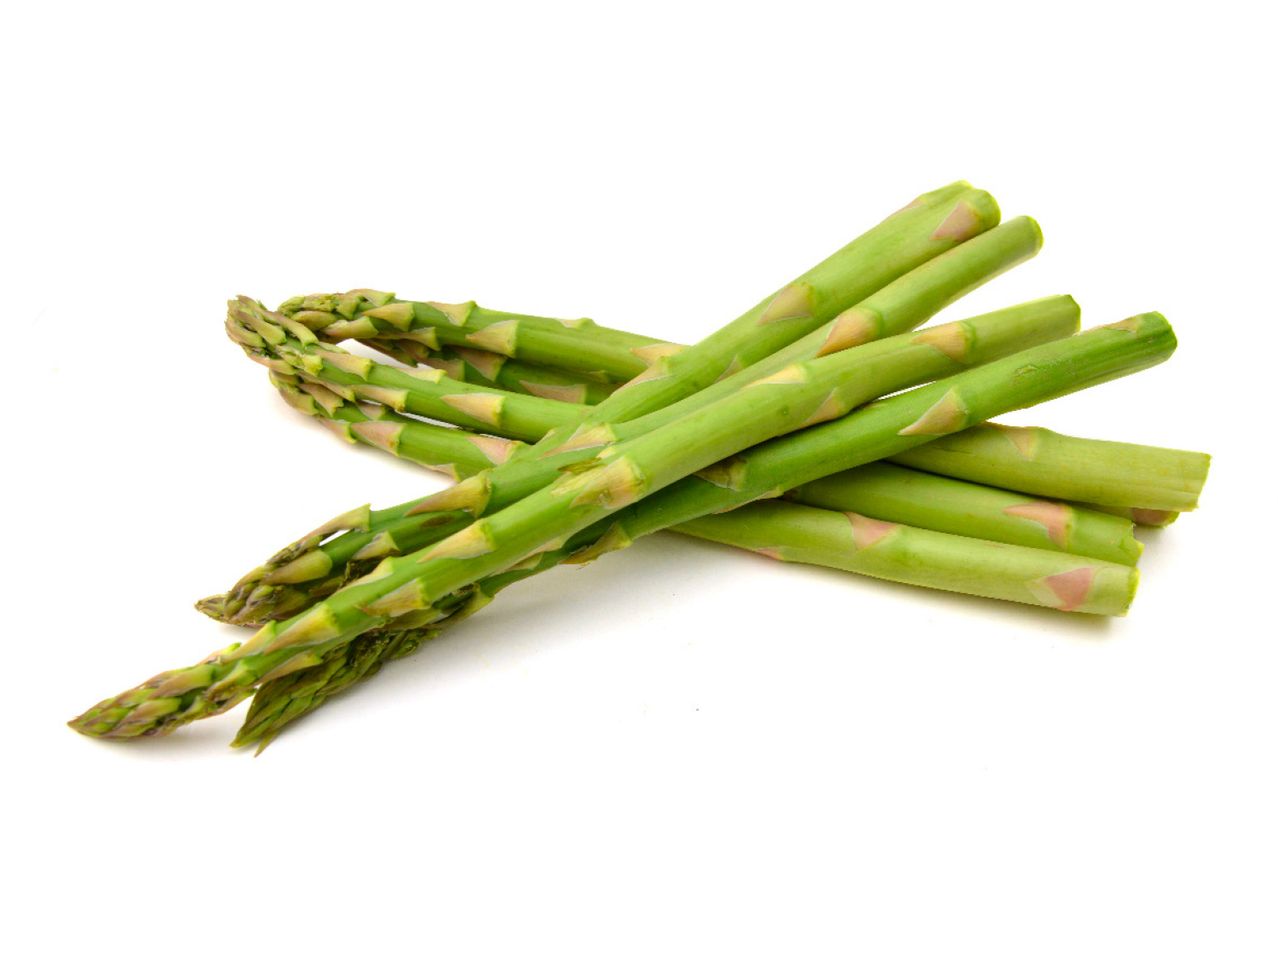 Go to full screen view: Asparagus - Image 1